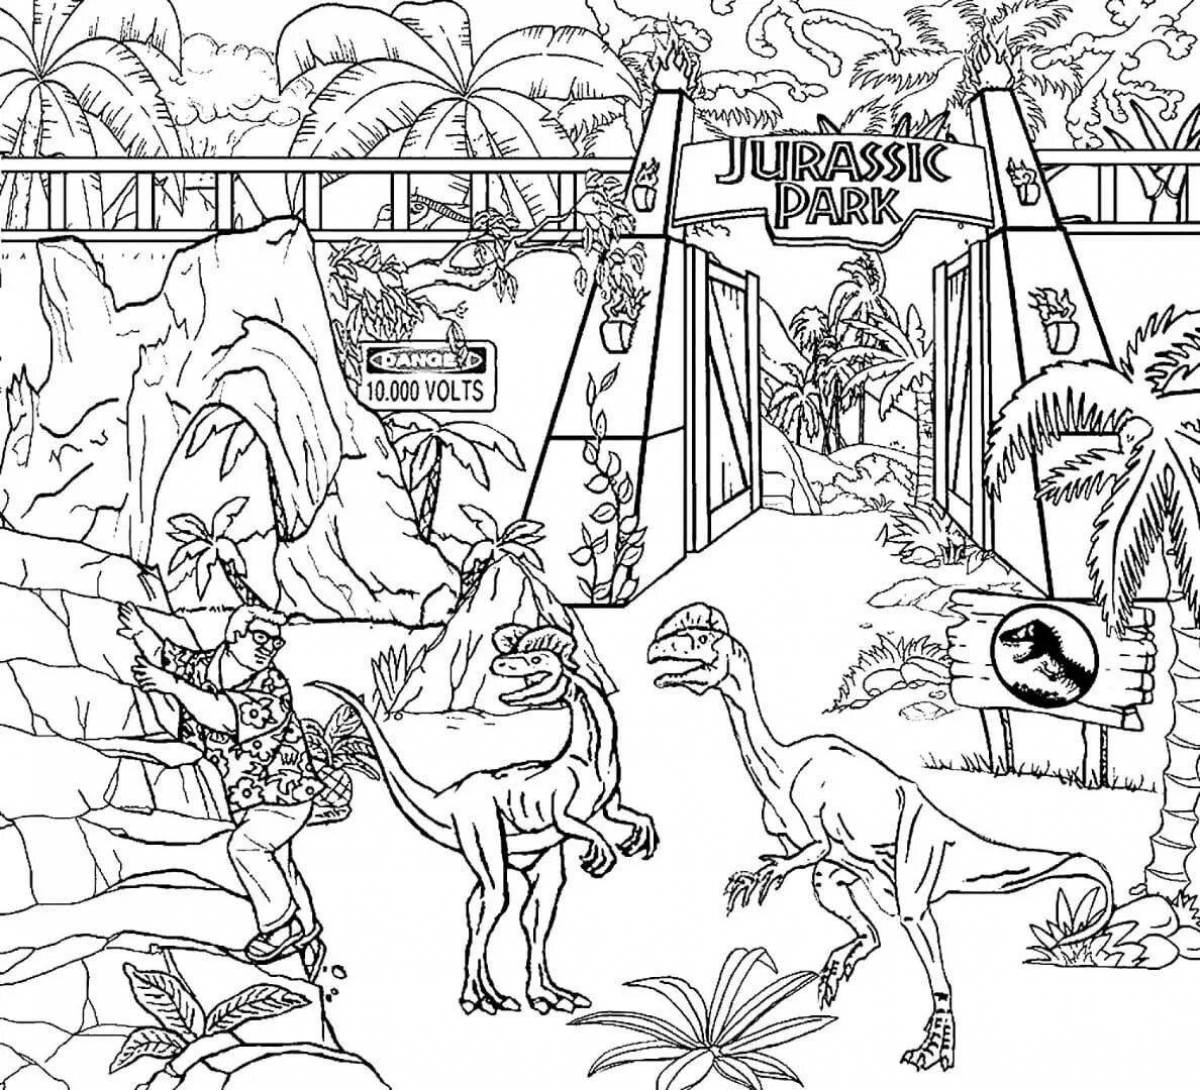 Lego dinosaurs jurassic world animated coloring page